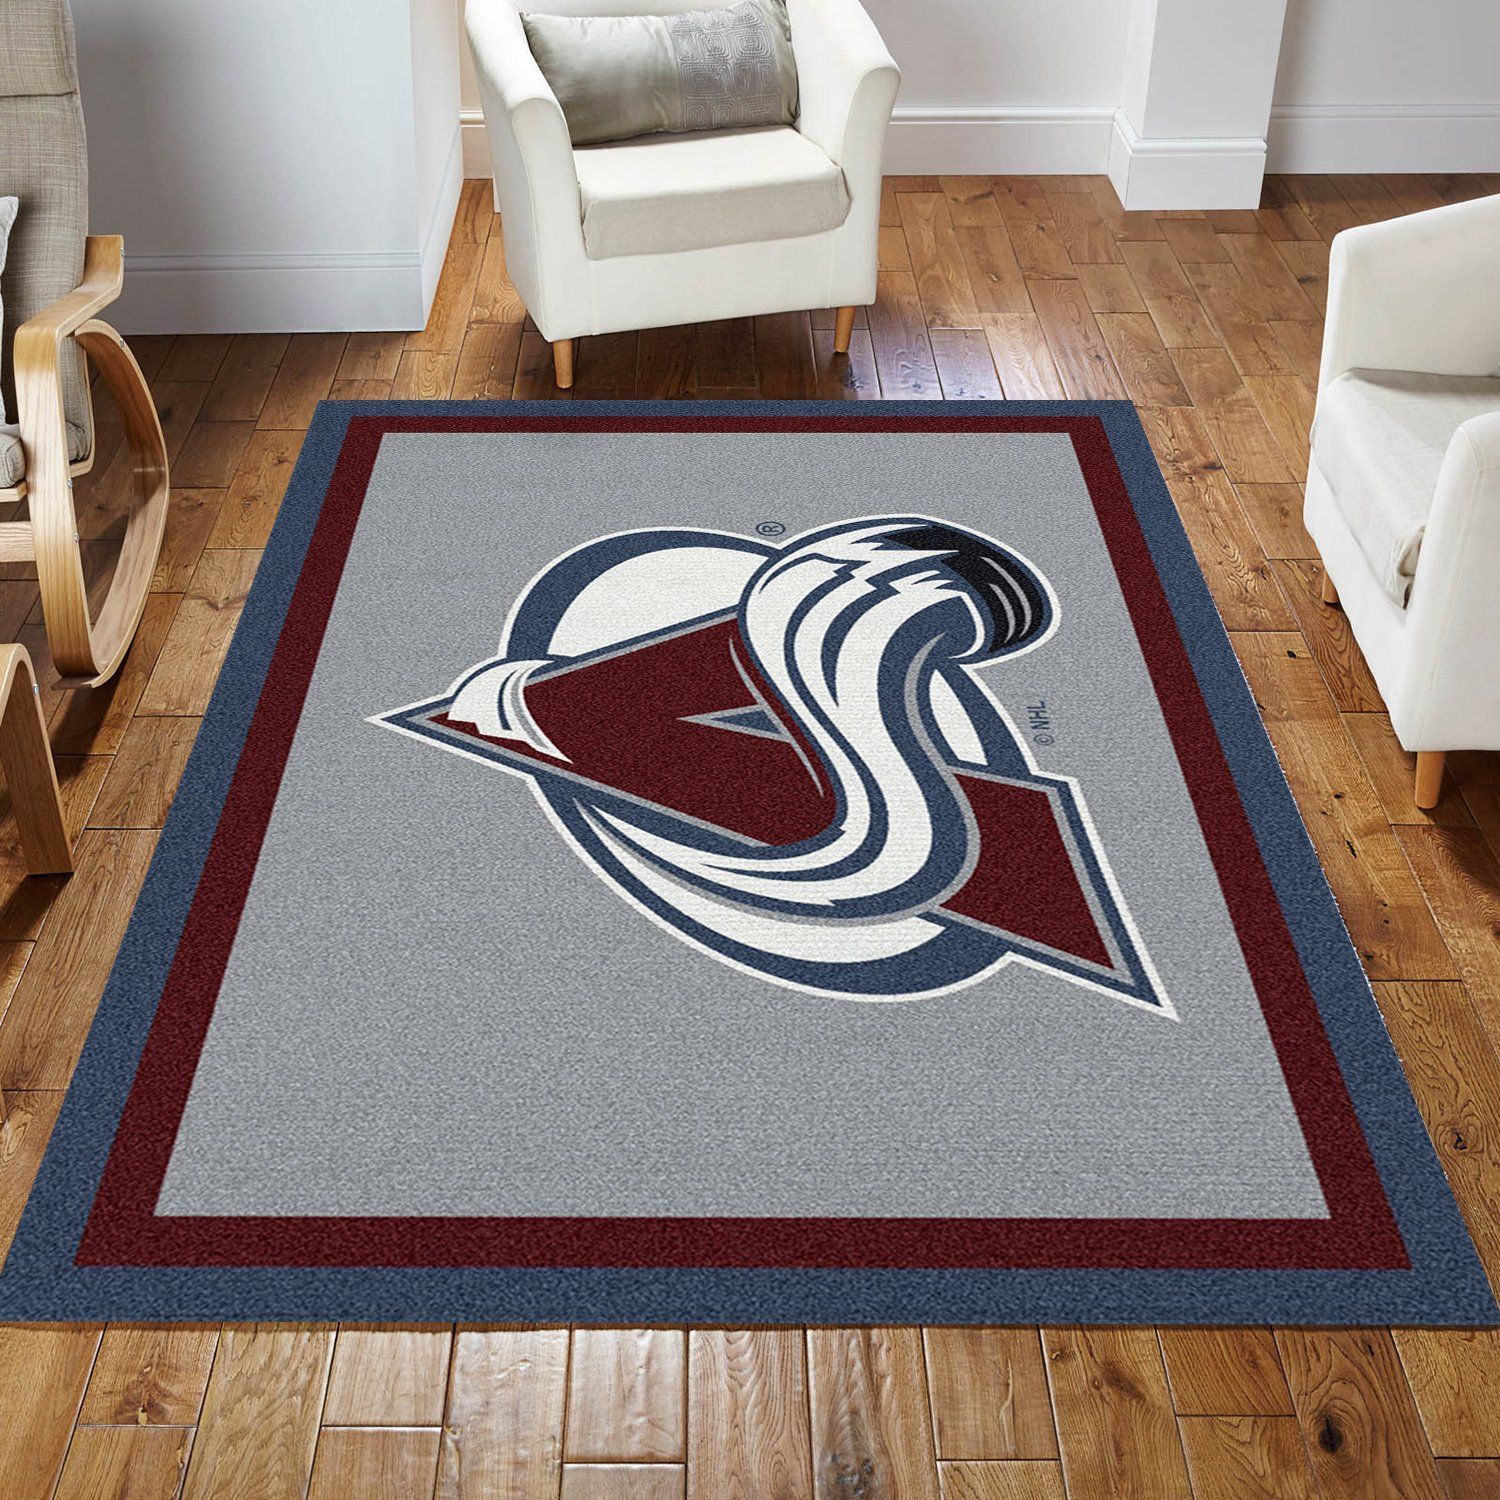 Nhl Spirit Colorado Avalanche Area Rug Carpet, Kitchen Rug, Christmas Gift US Decor - Indoor Outdoor Rugs 3